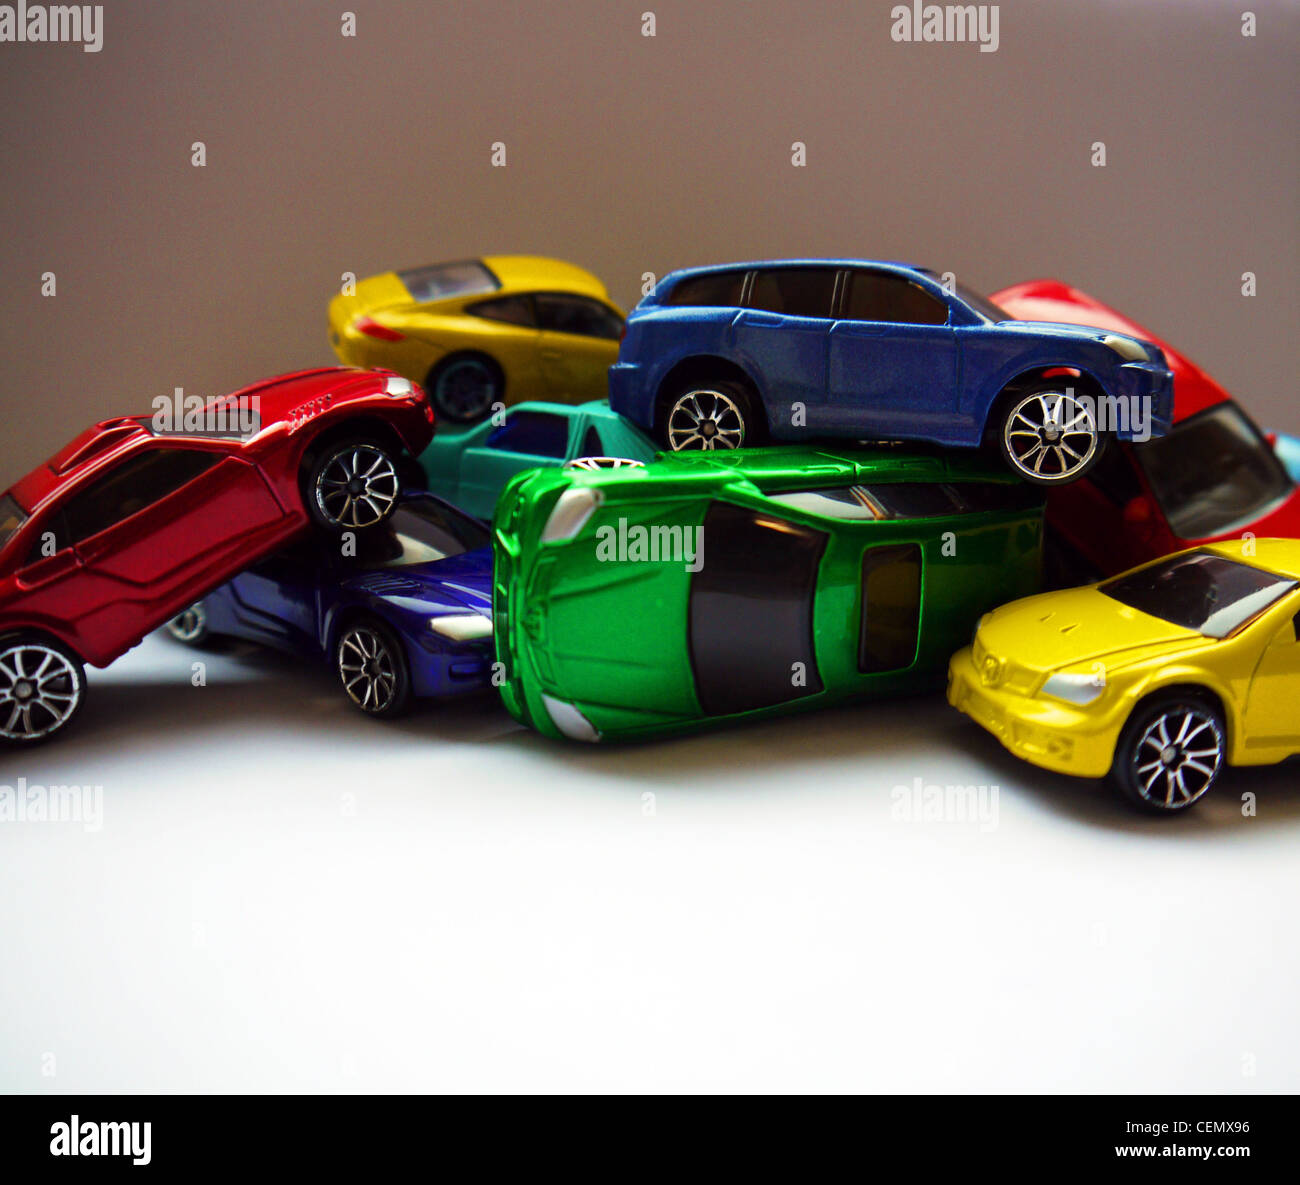 A pile of colorful toy cars on a white background Stock Photo